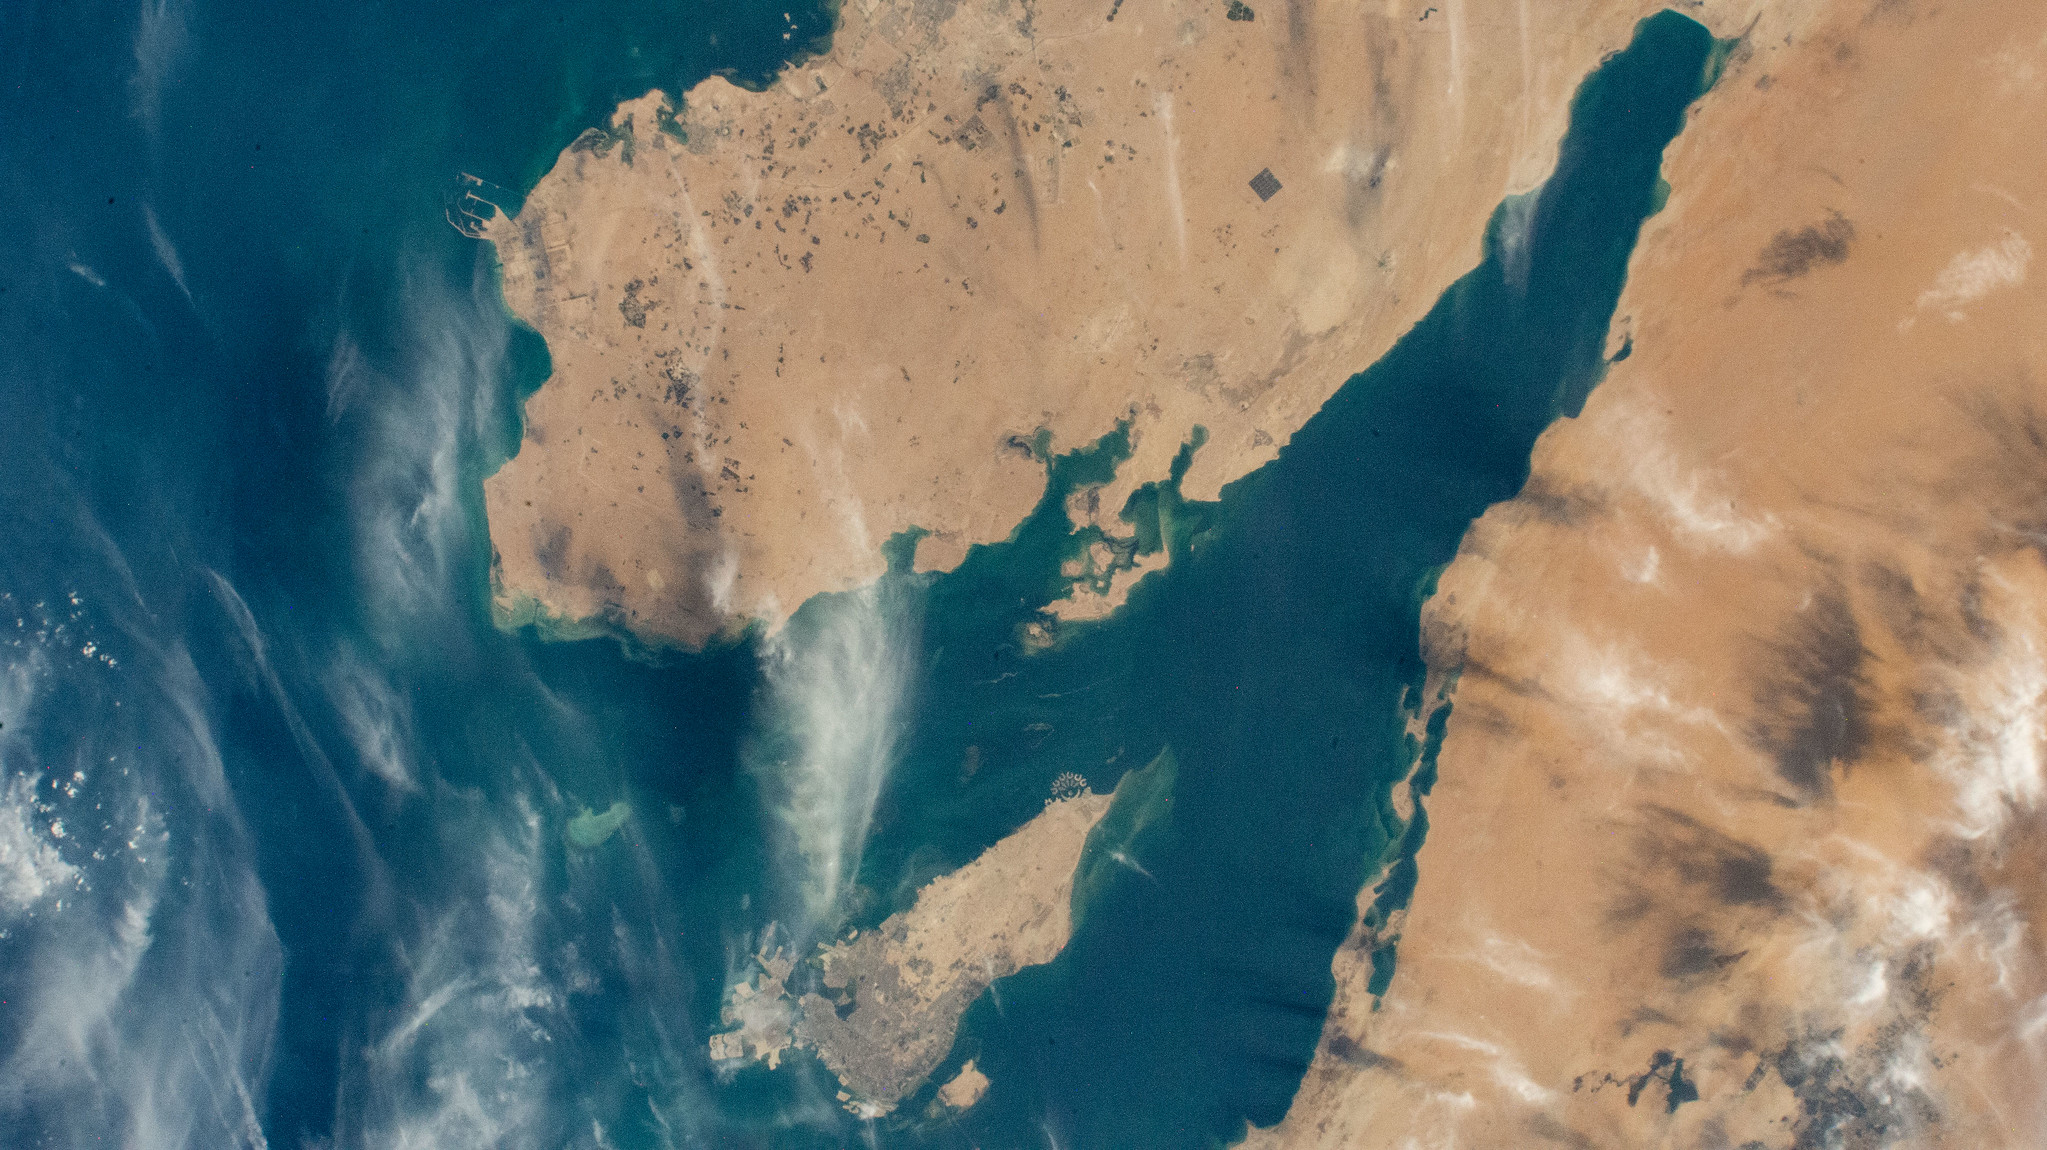 image of Qatar, Bahrain, and the eastern coast of Saudi Arabia on the Persian Gulf as seen from the International Space Station as it orbits above the Arabian Peninsula. 